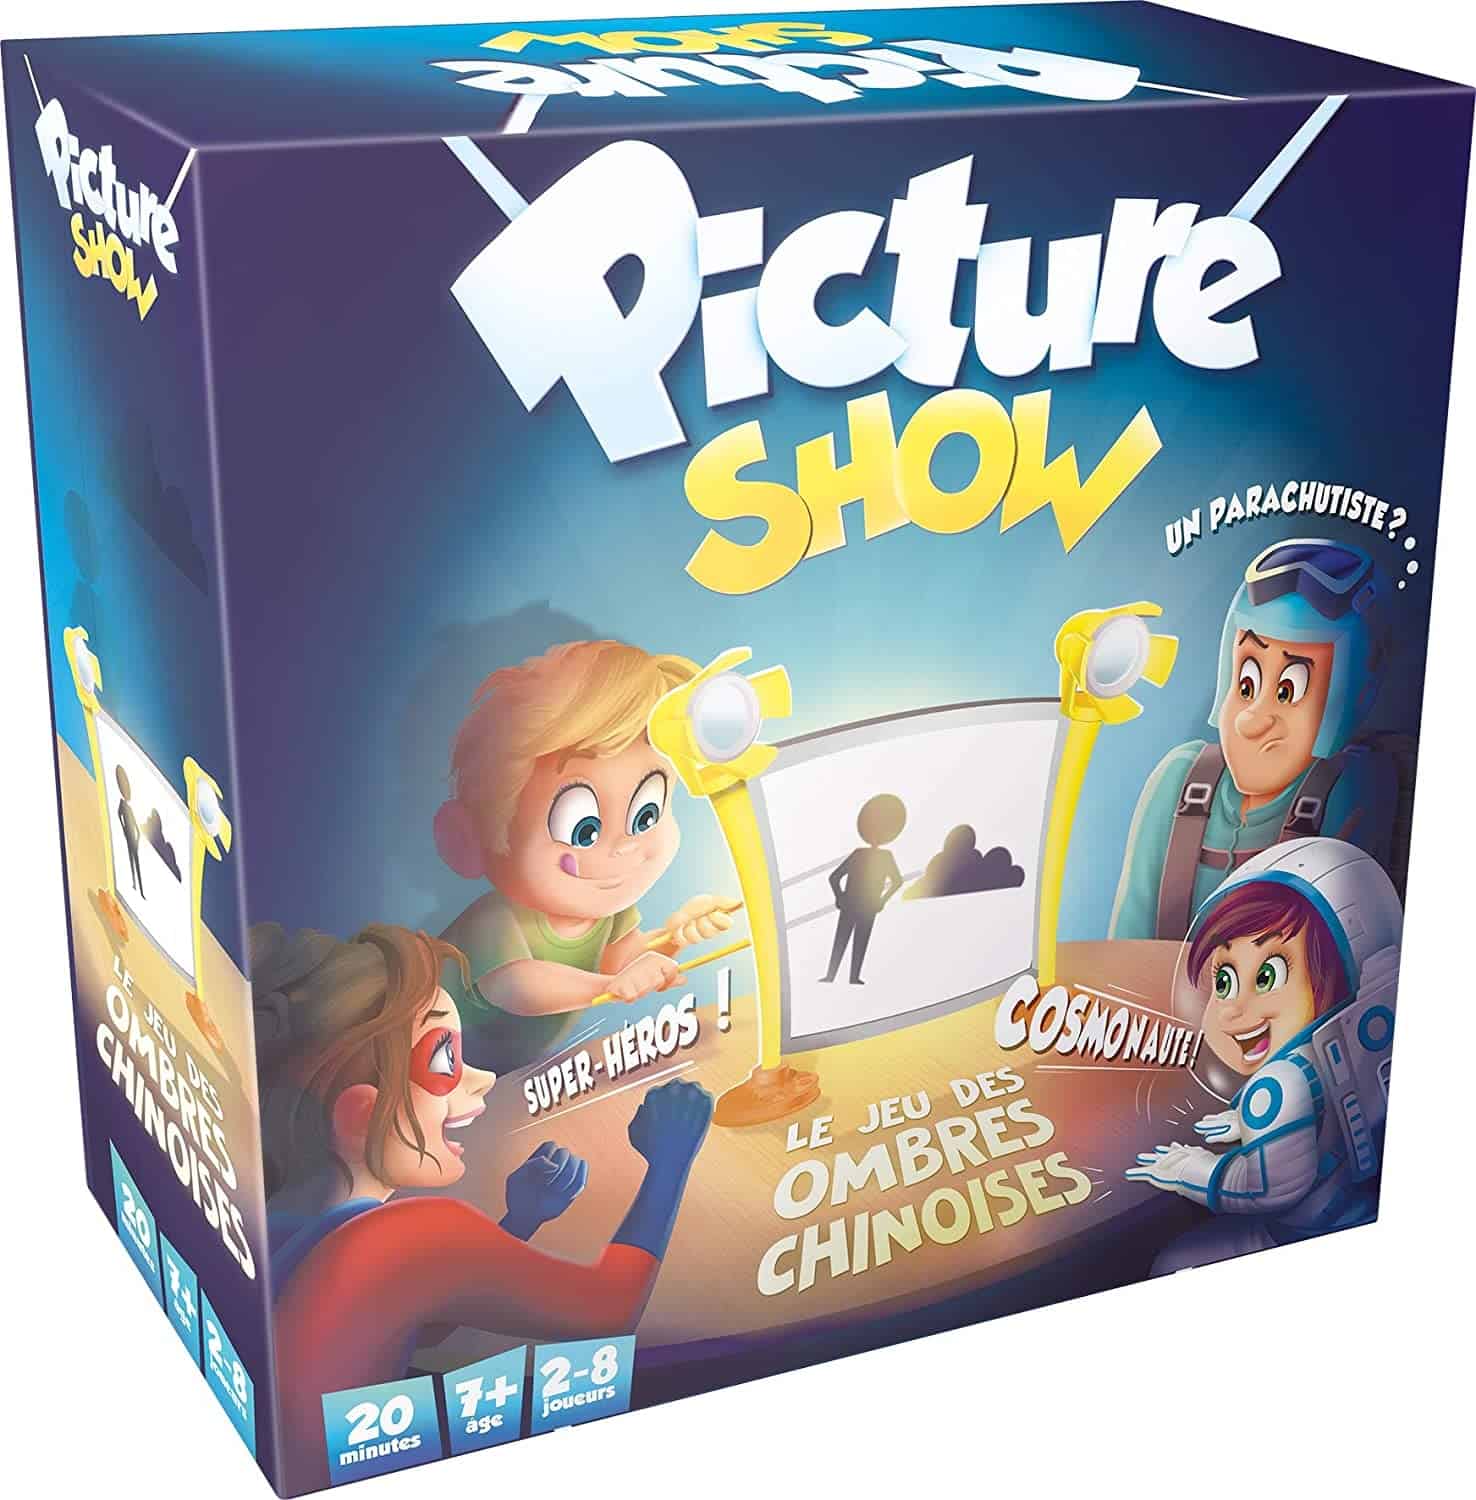 Picture Show Asmodee 06558